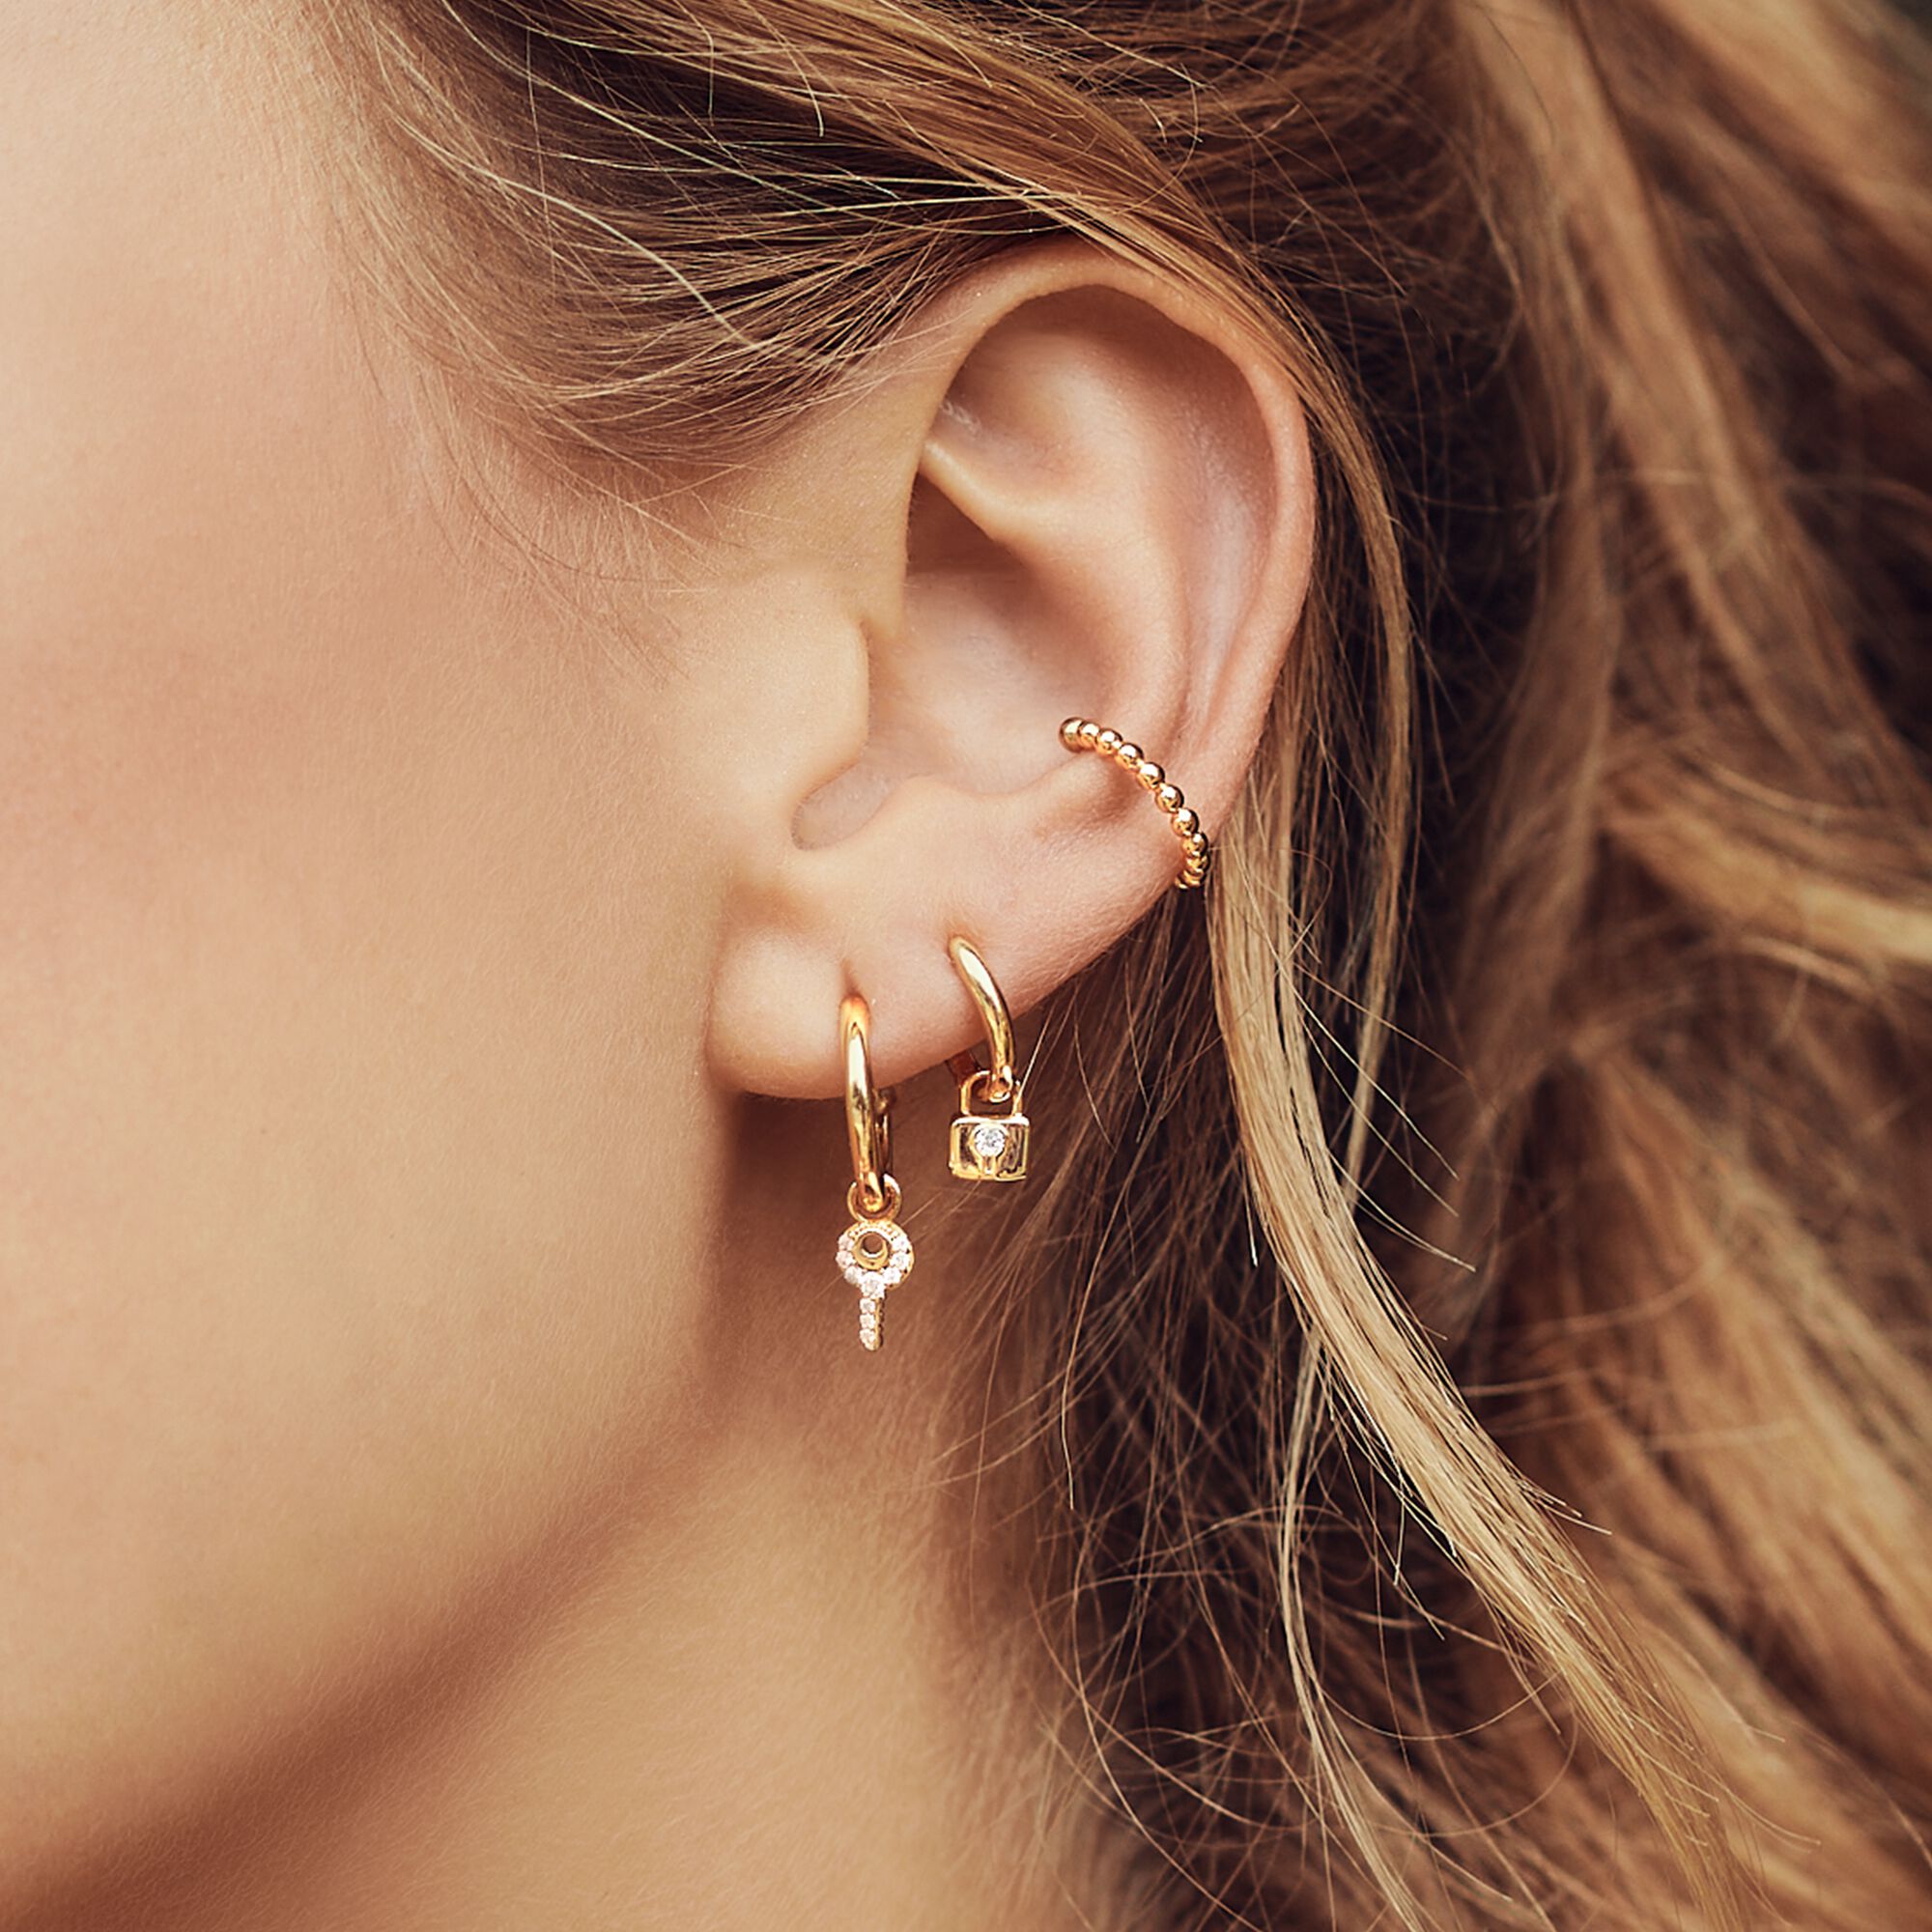 Hoop Mix For in THOMAS SABO Match-Looks gold earring: & │